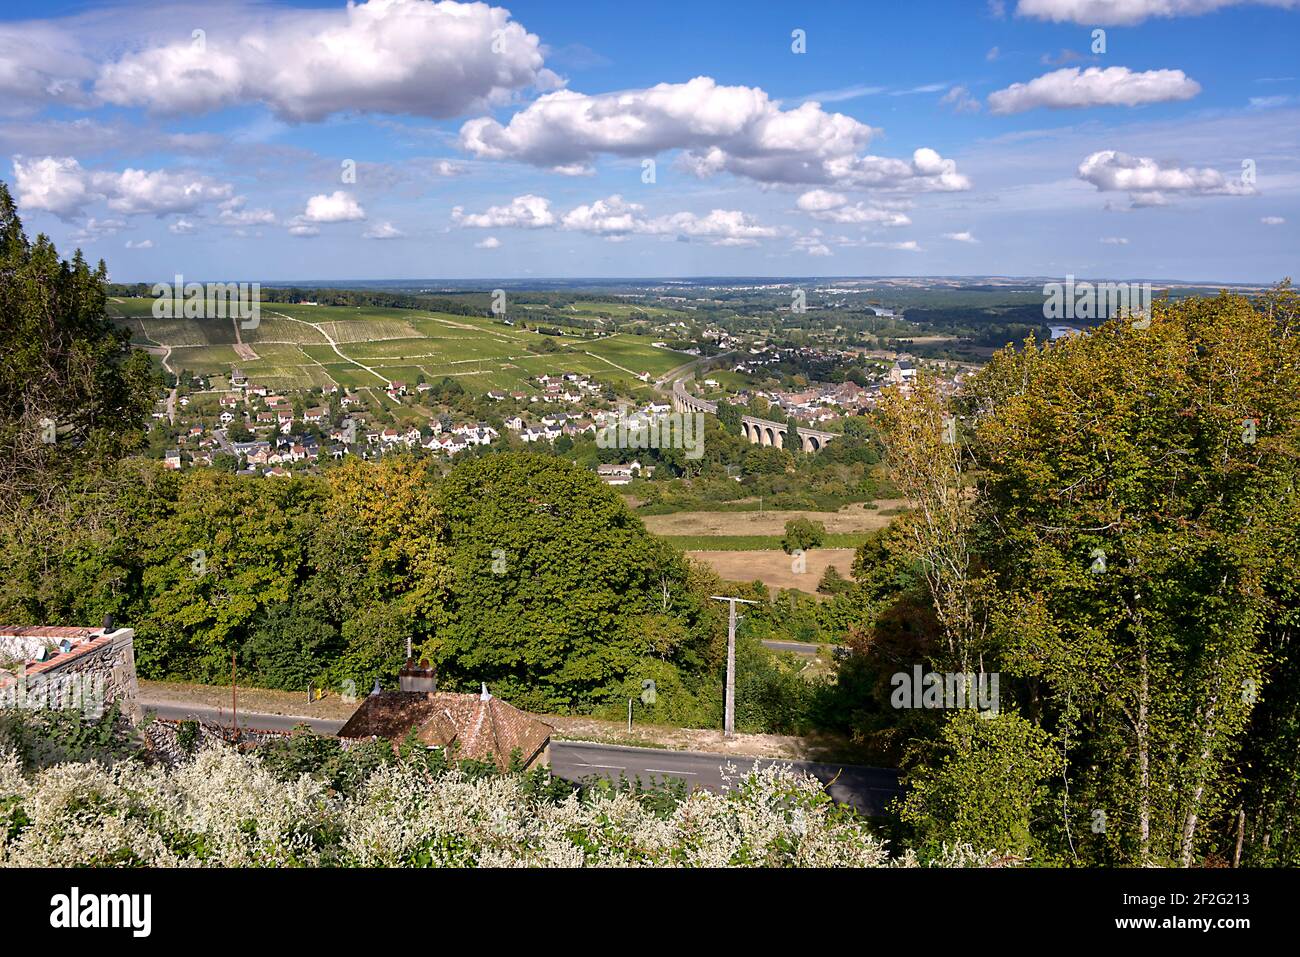 Aerial view of Saint-Satur and its viaduct seen from town Sancerre. Saint-Satur is a commune in the Cher department in central France. Stock Photo